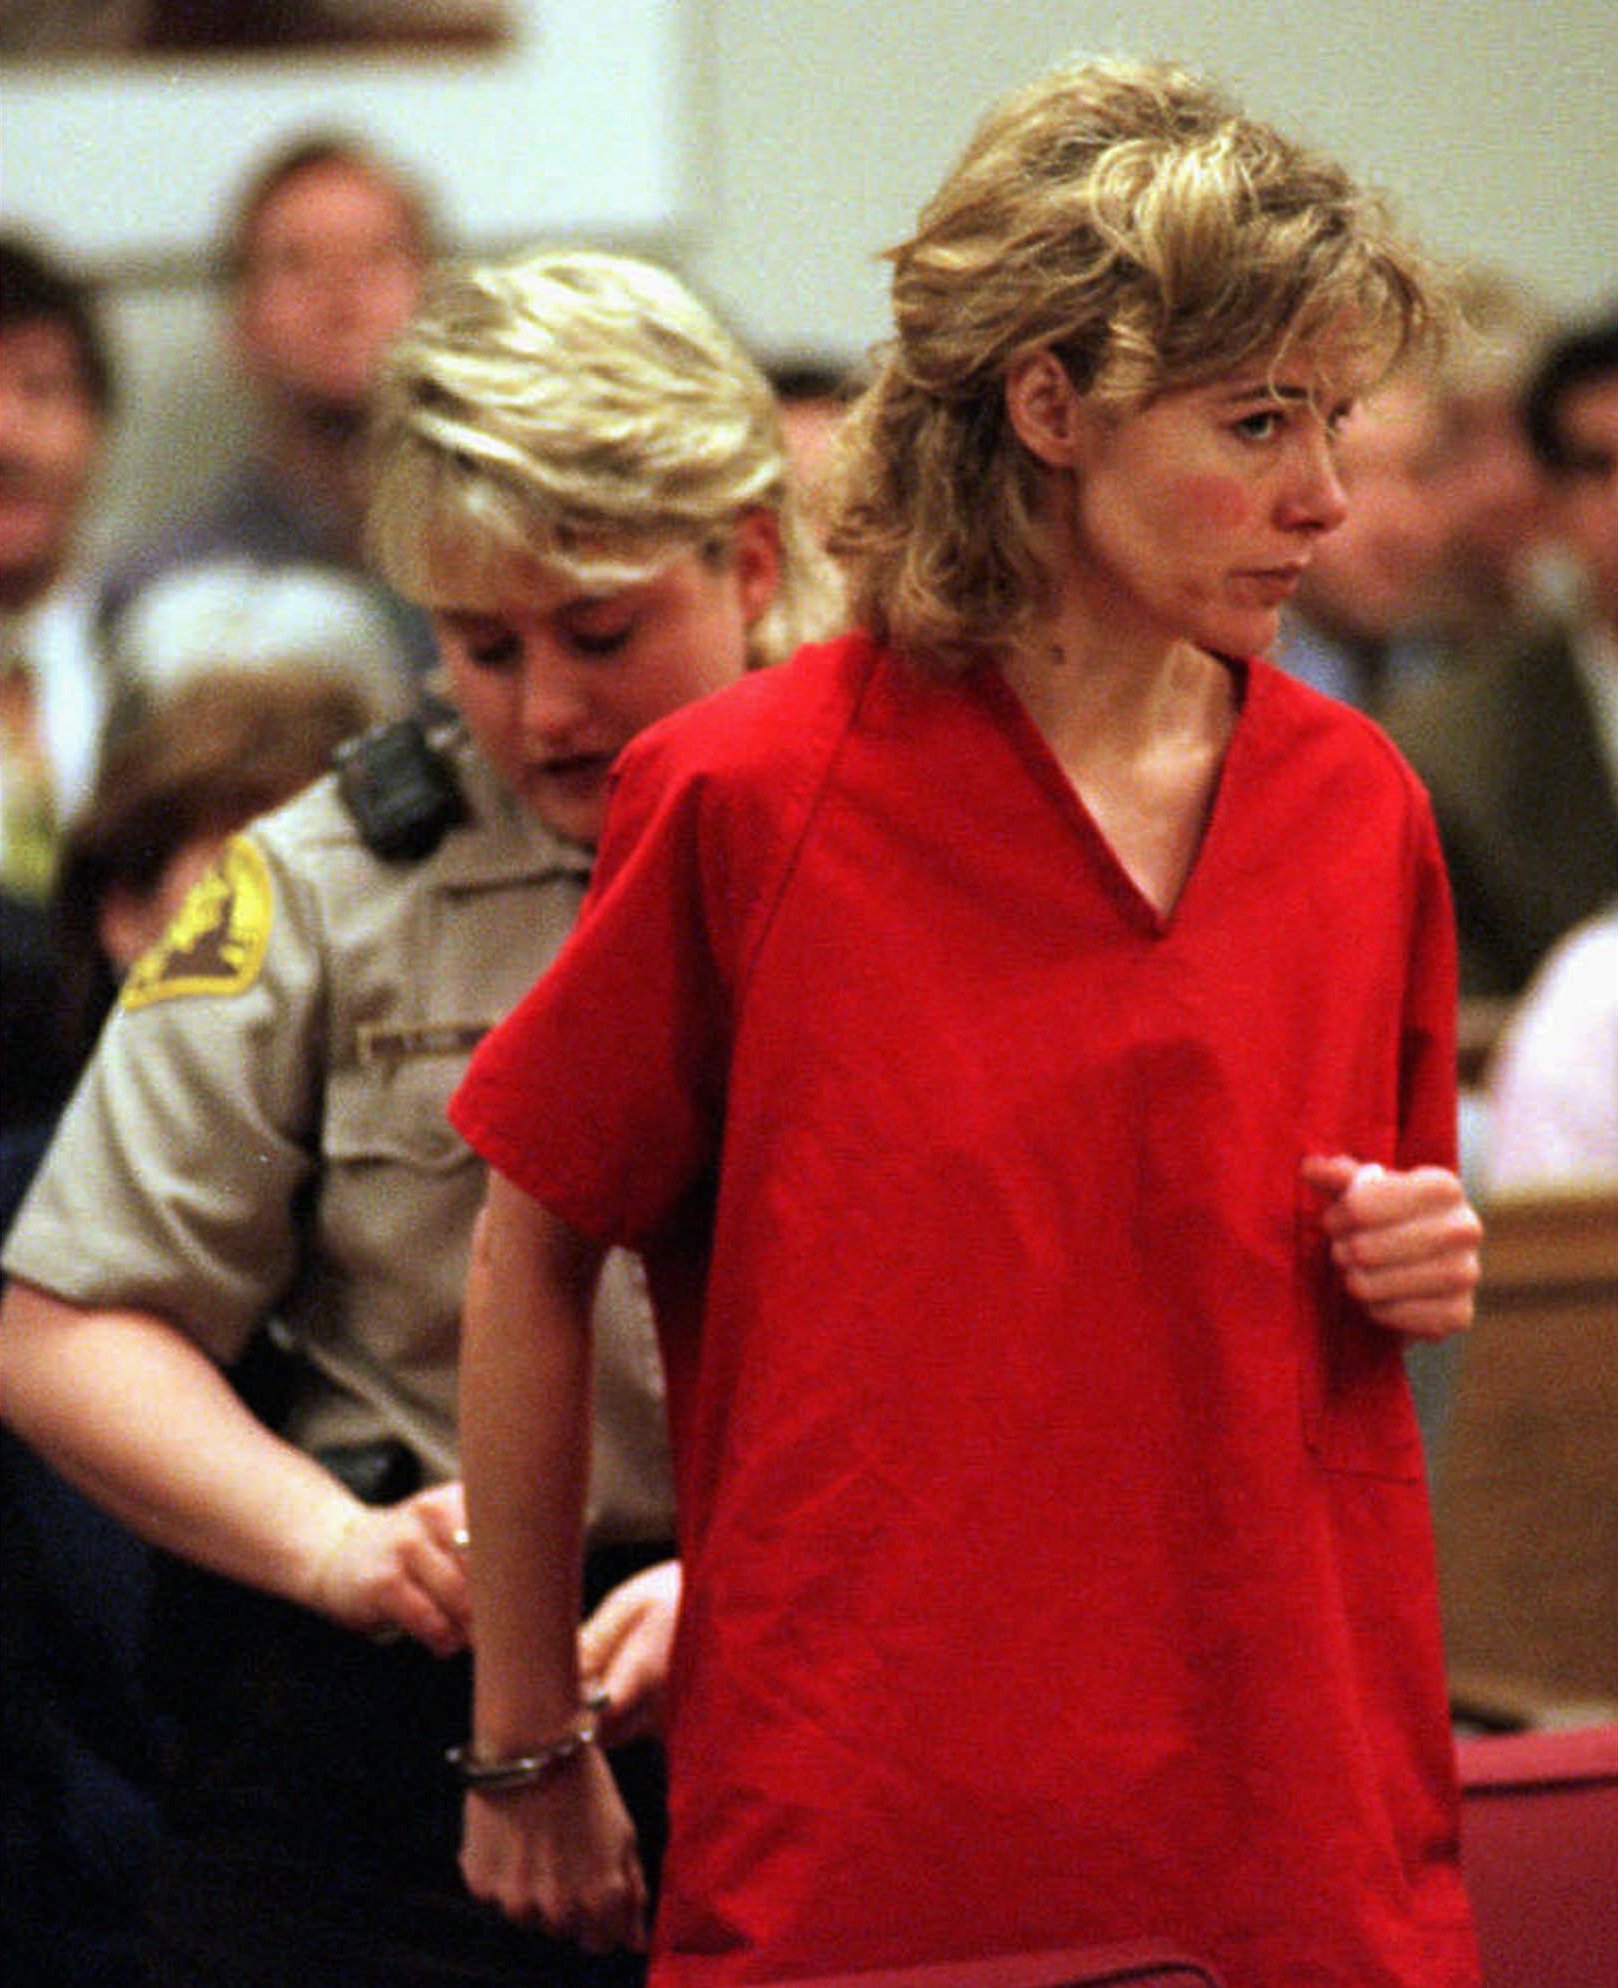 Mary Kay LeTourneau has her handcuffs removed at the start of a hearing in Seattle, on Feb. 6, 1998. (Alan Berner—AP)